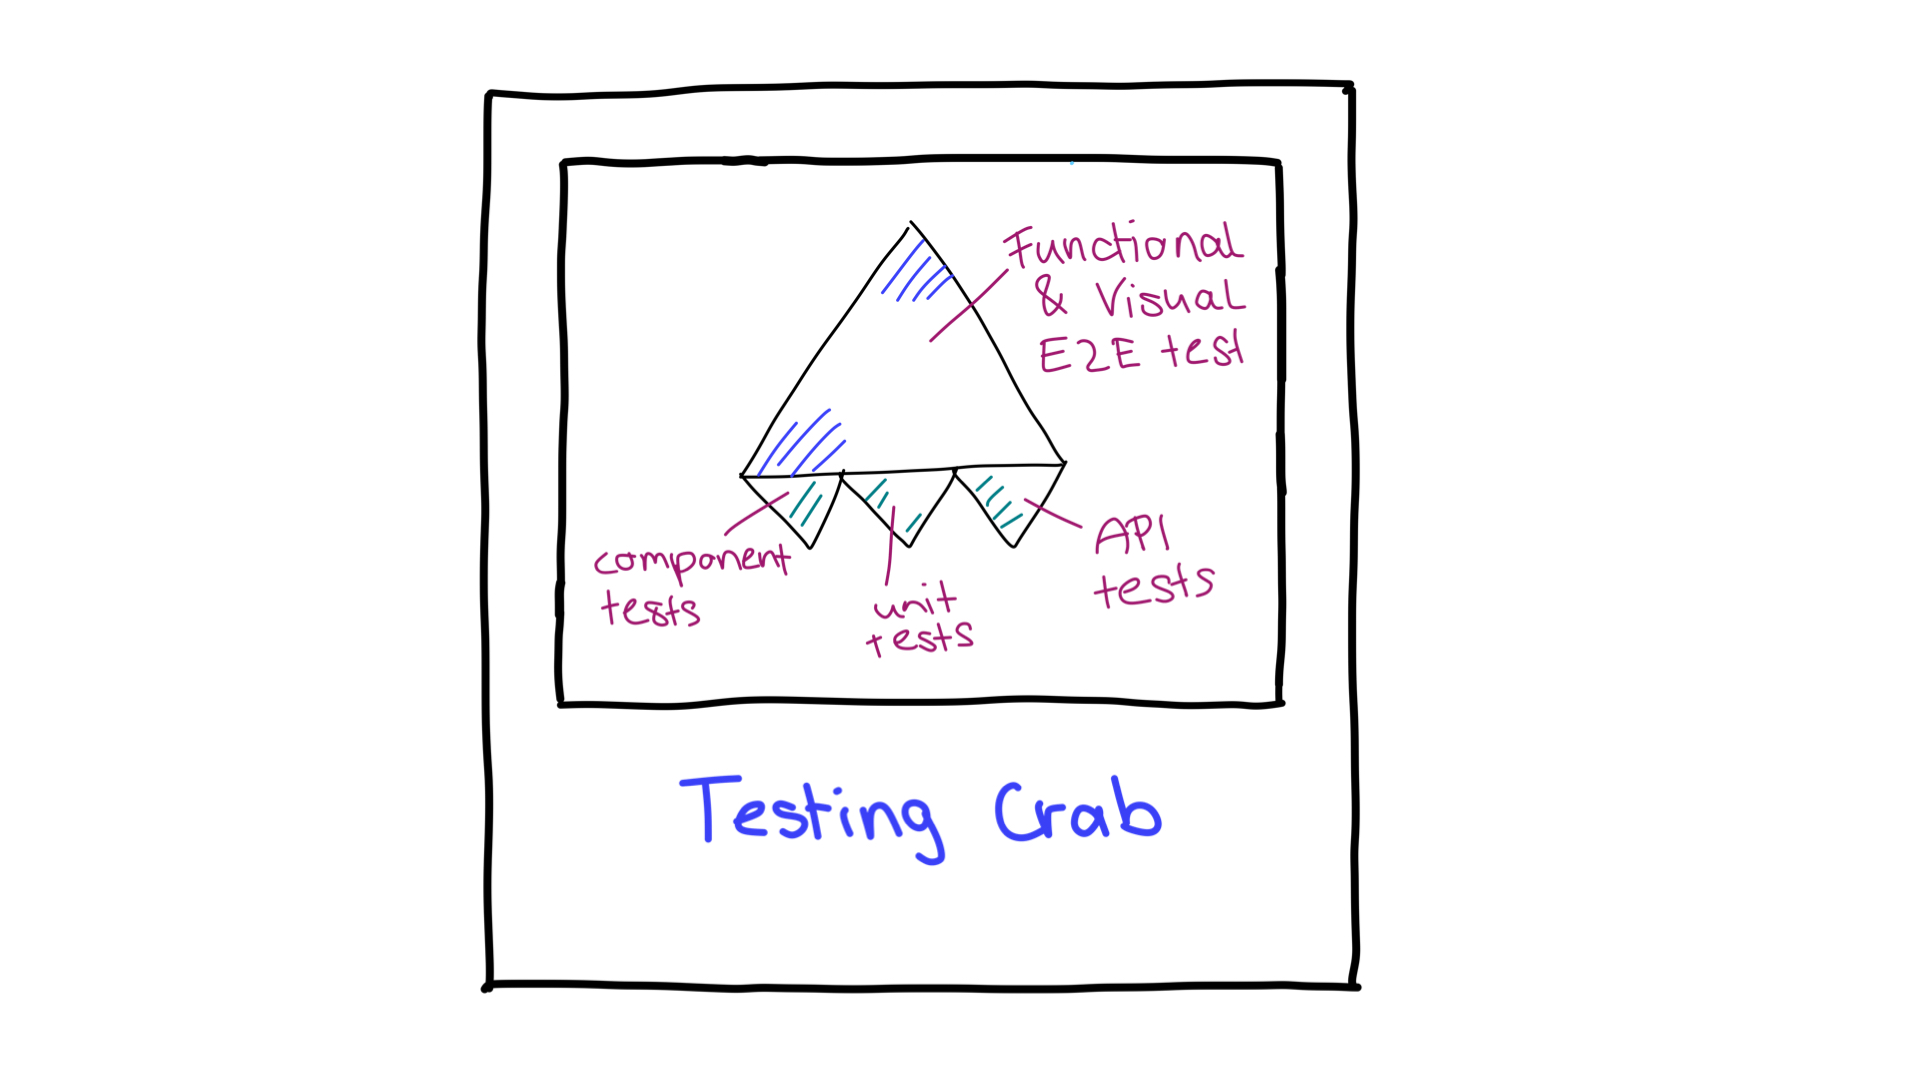 The testing crab.